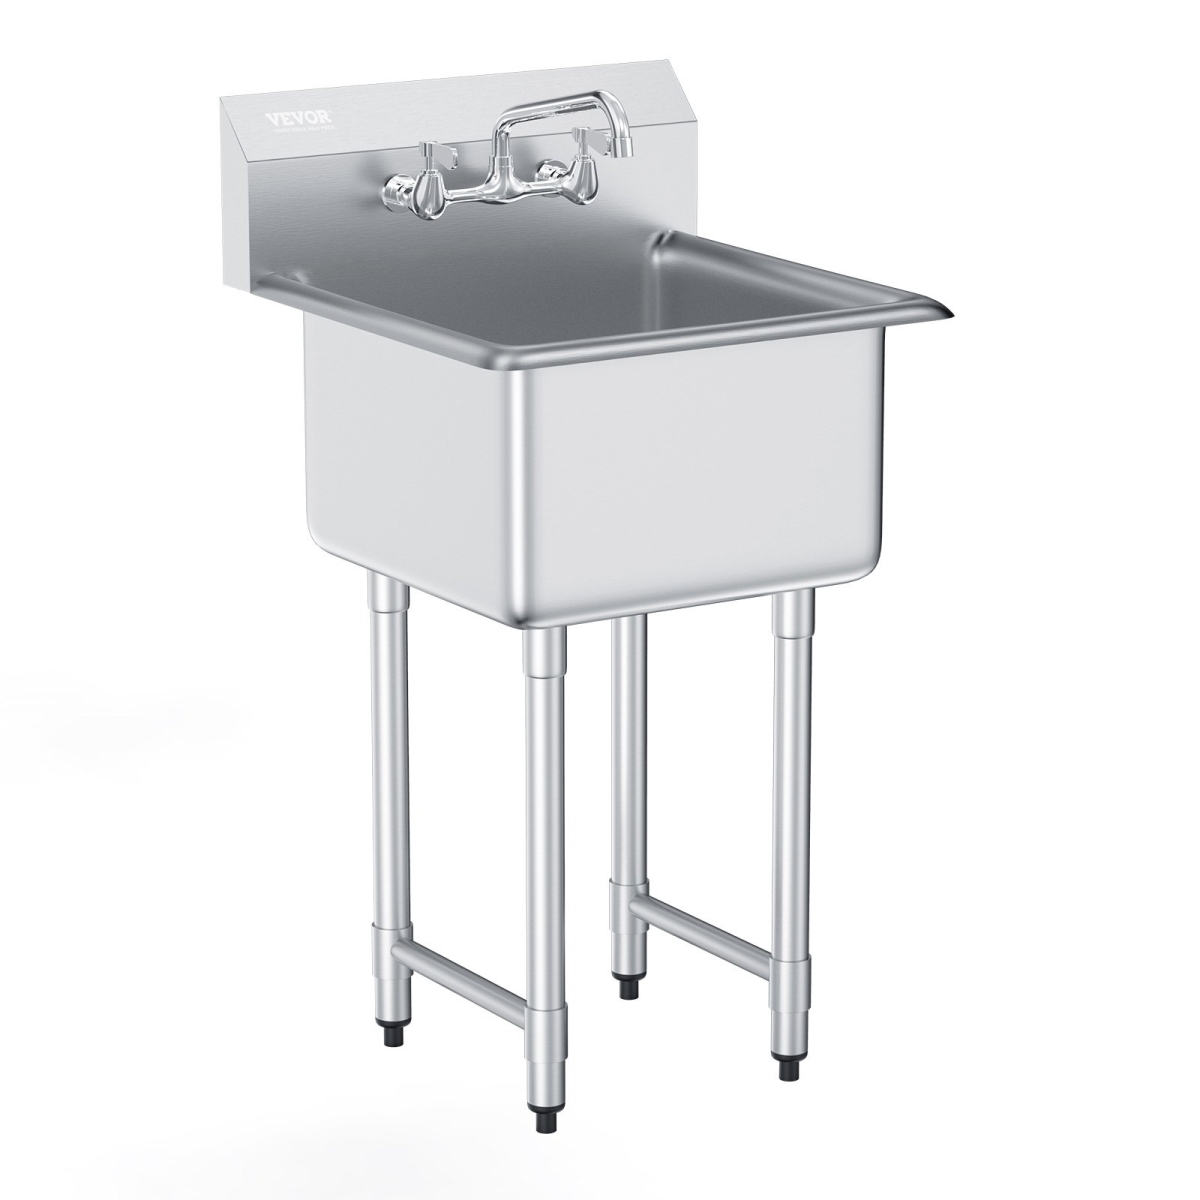 Picture of Vevor SYLSSCDCY1818SZNQV0 Stainless Steel Prep & Utility Sink - 1 Compartment Free Standing Small Sink Include Faucet & Legs - 21 x 41 in.